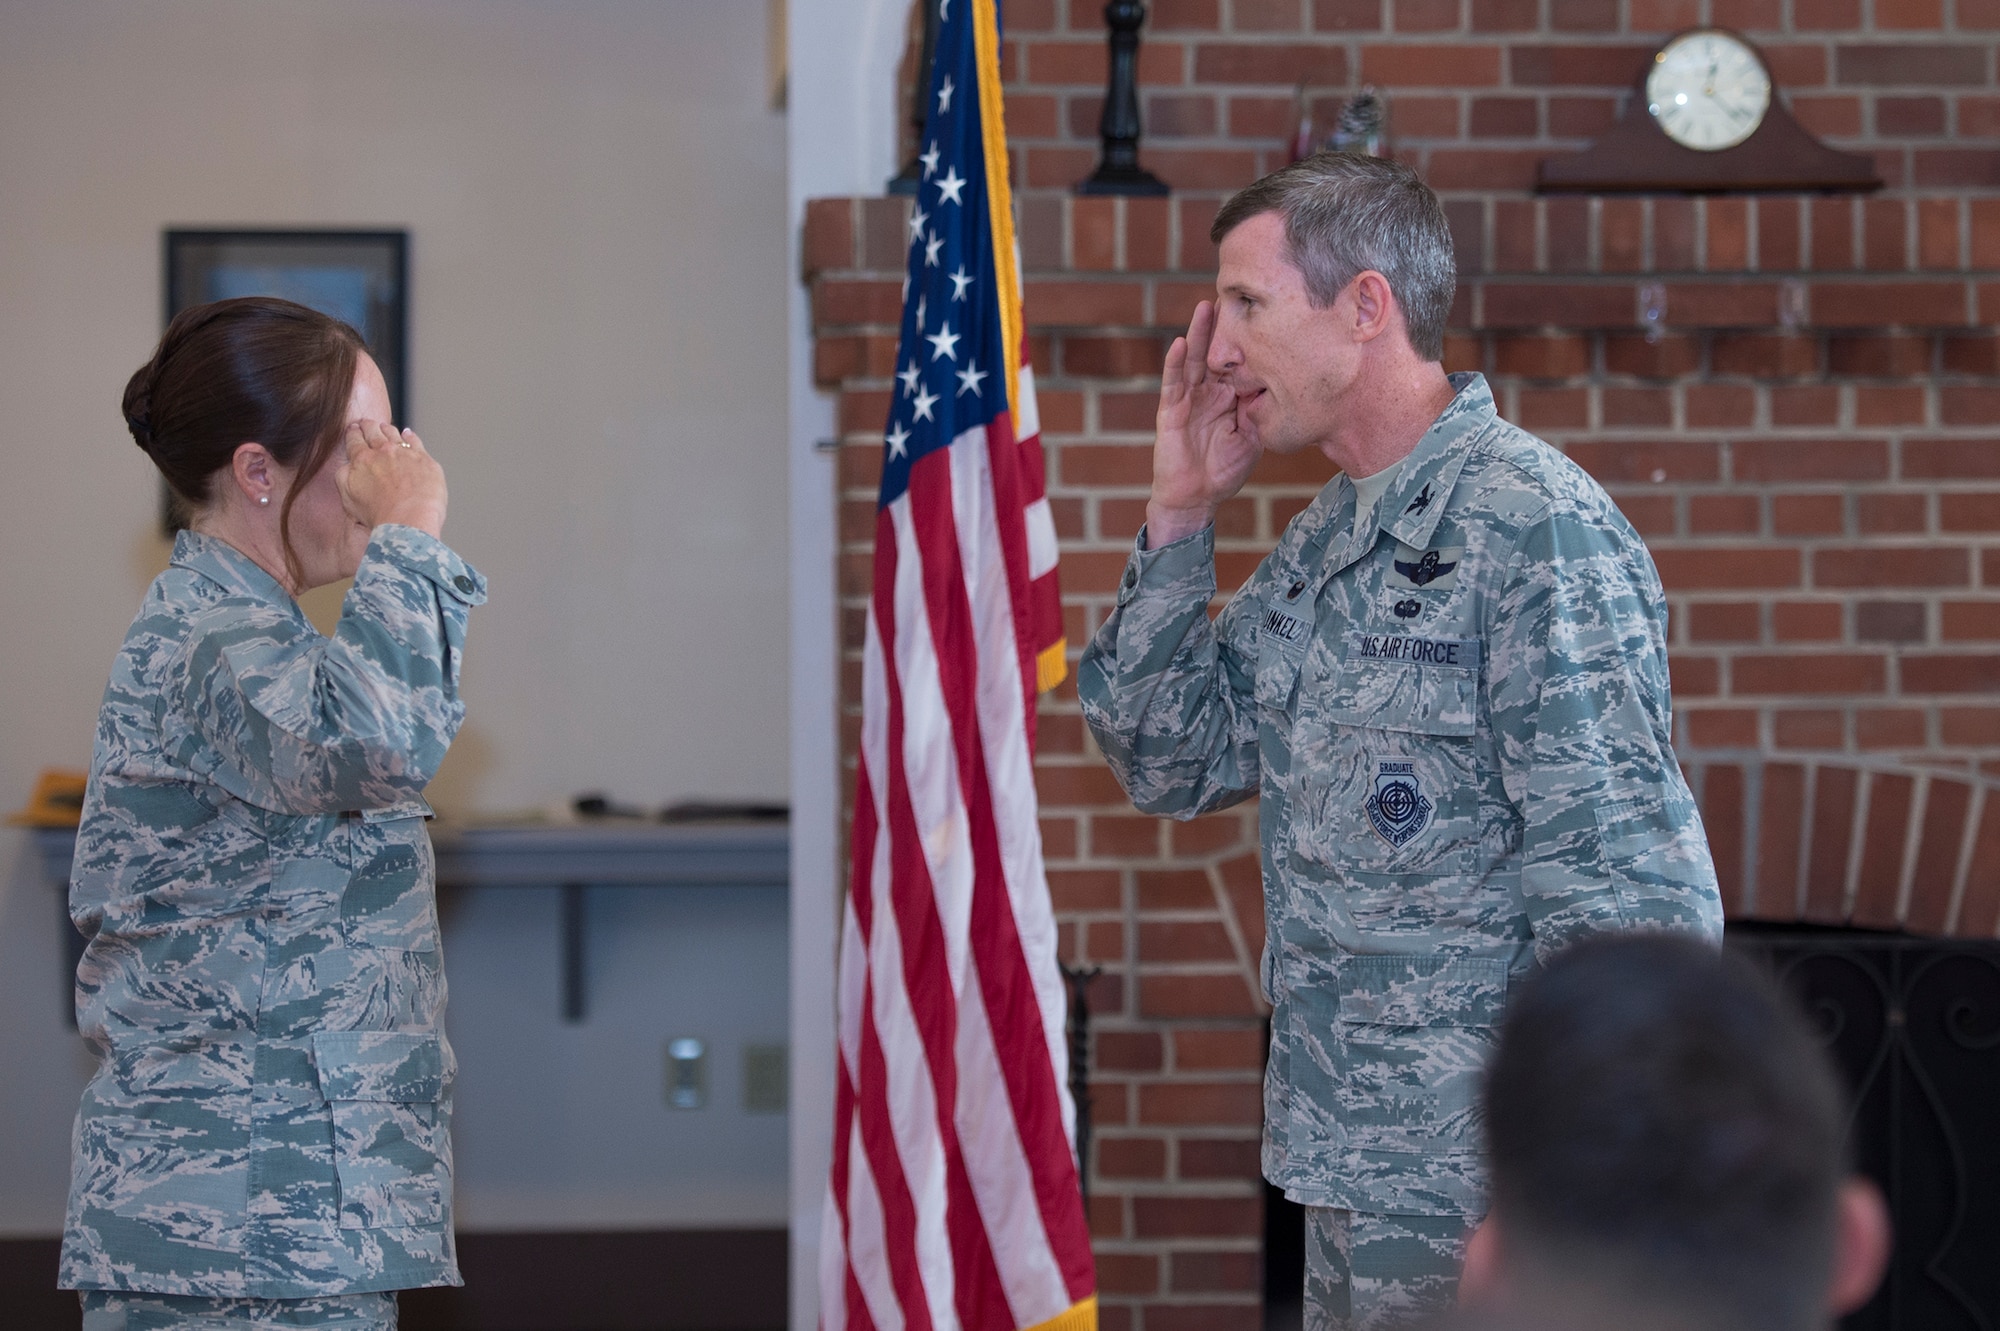 Col. Thomas Kunkel, 23d Wing commander, renders a salute to Lt. Col. Cynthia Kearley, 23d Wing Staff Judge Advocate and Leadership Moody, Emerge Moody cadre member, for an exceptional job during Moody’s first 2017 Emerge Moody, Leadership Moody  installment at a graduation ceremony, June 23, 2017, at Moody Air Force Base, Ga. Kearley was coined for her efforts in spearheading the programs which were designed to enhance  participant’s Air Force networks and their continued growth as Air Force leaders throughout their career. (U.S. Air Force photo by Senior Airman Greg Nash)